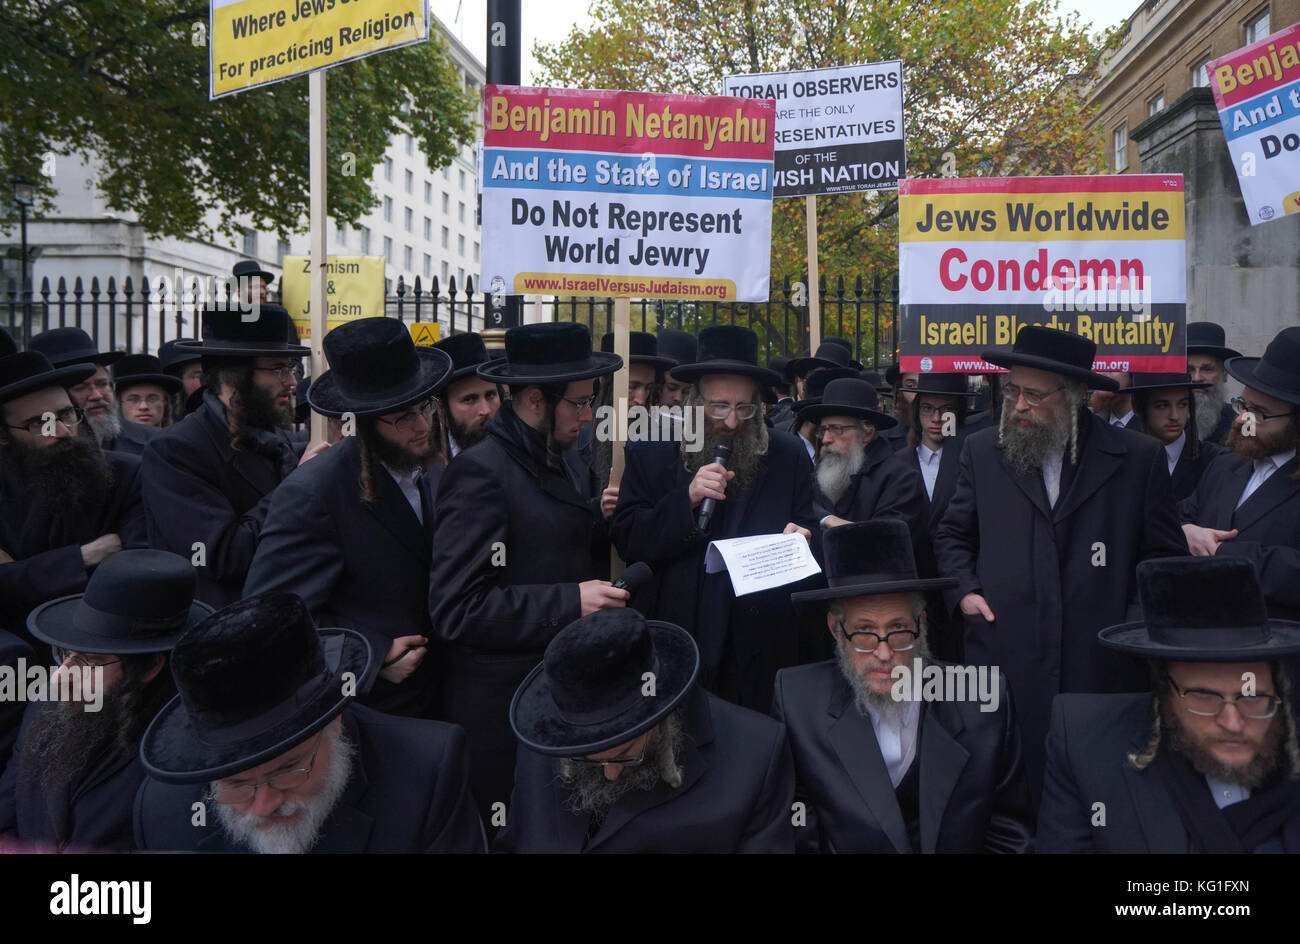 London, UK. 02nd Nov, 2017. Several hundred rabbinical leaders in London protesting against the visit by Israeli premier Benjamin Netanyahu on the occasion of the centenary of the Balfour Declaration. Photo date: Thursday, November 2, 2017. Credit: Roger Garfield/Alamy Live News Stock Photo